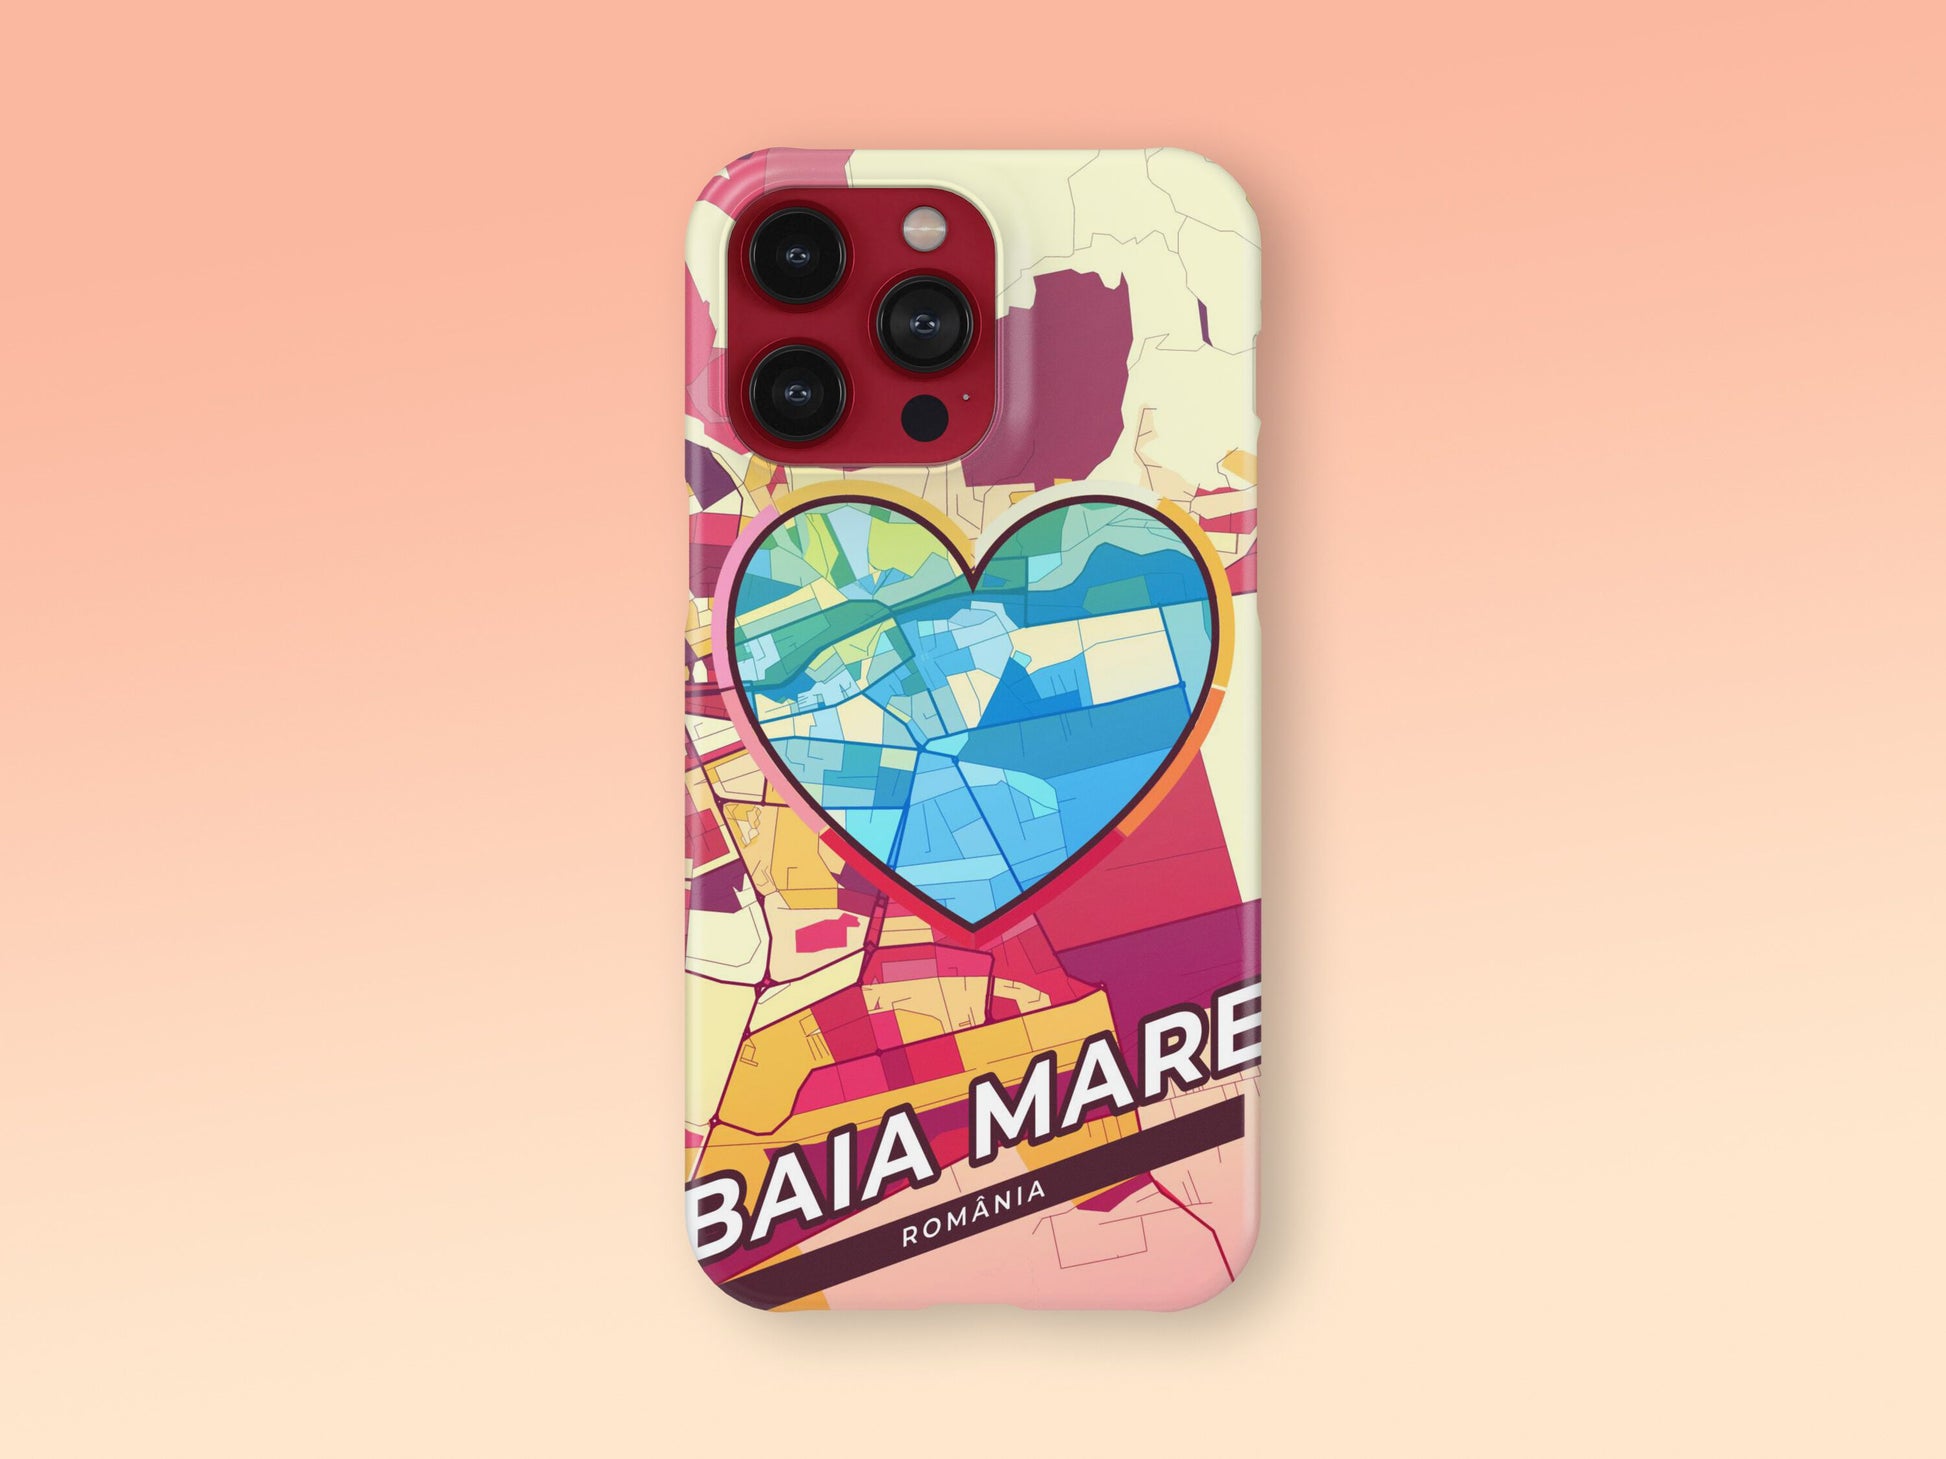 Baia Mare Romania slim phone case with colorful icon. Birthday, wedding or housewarming gift. Couple match cases. 2